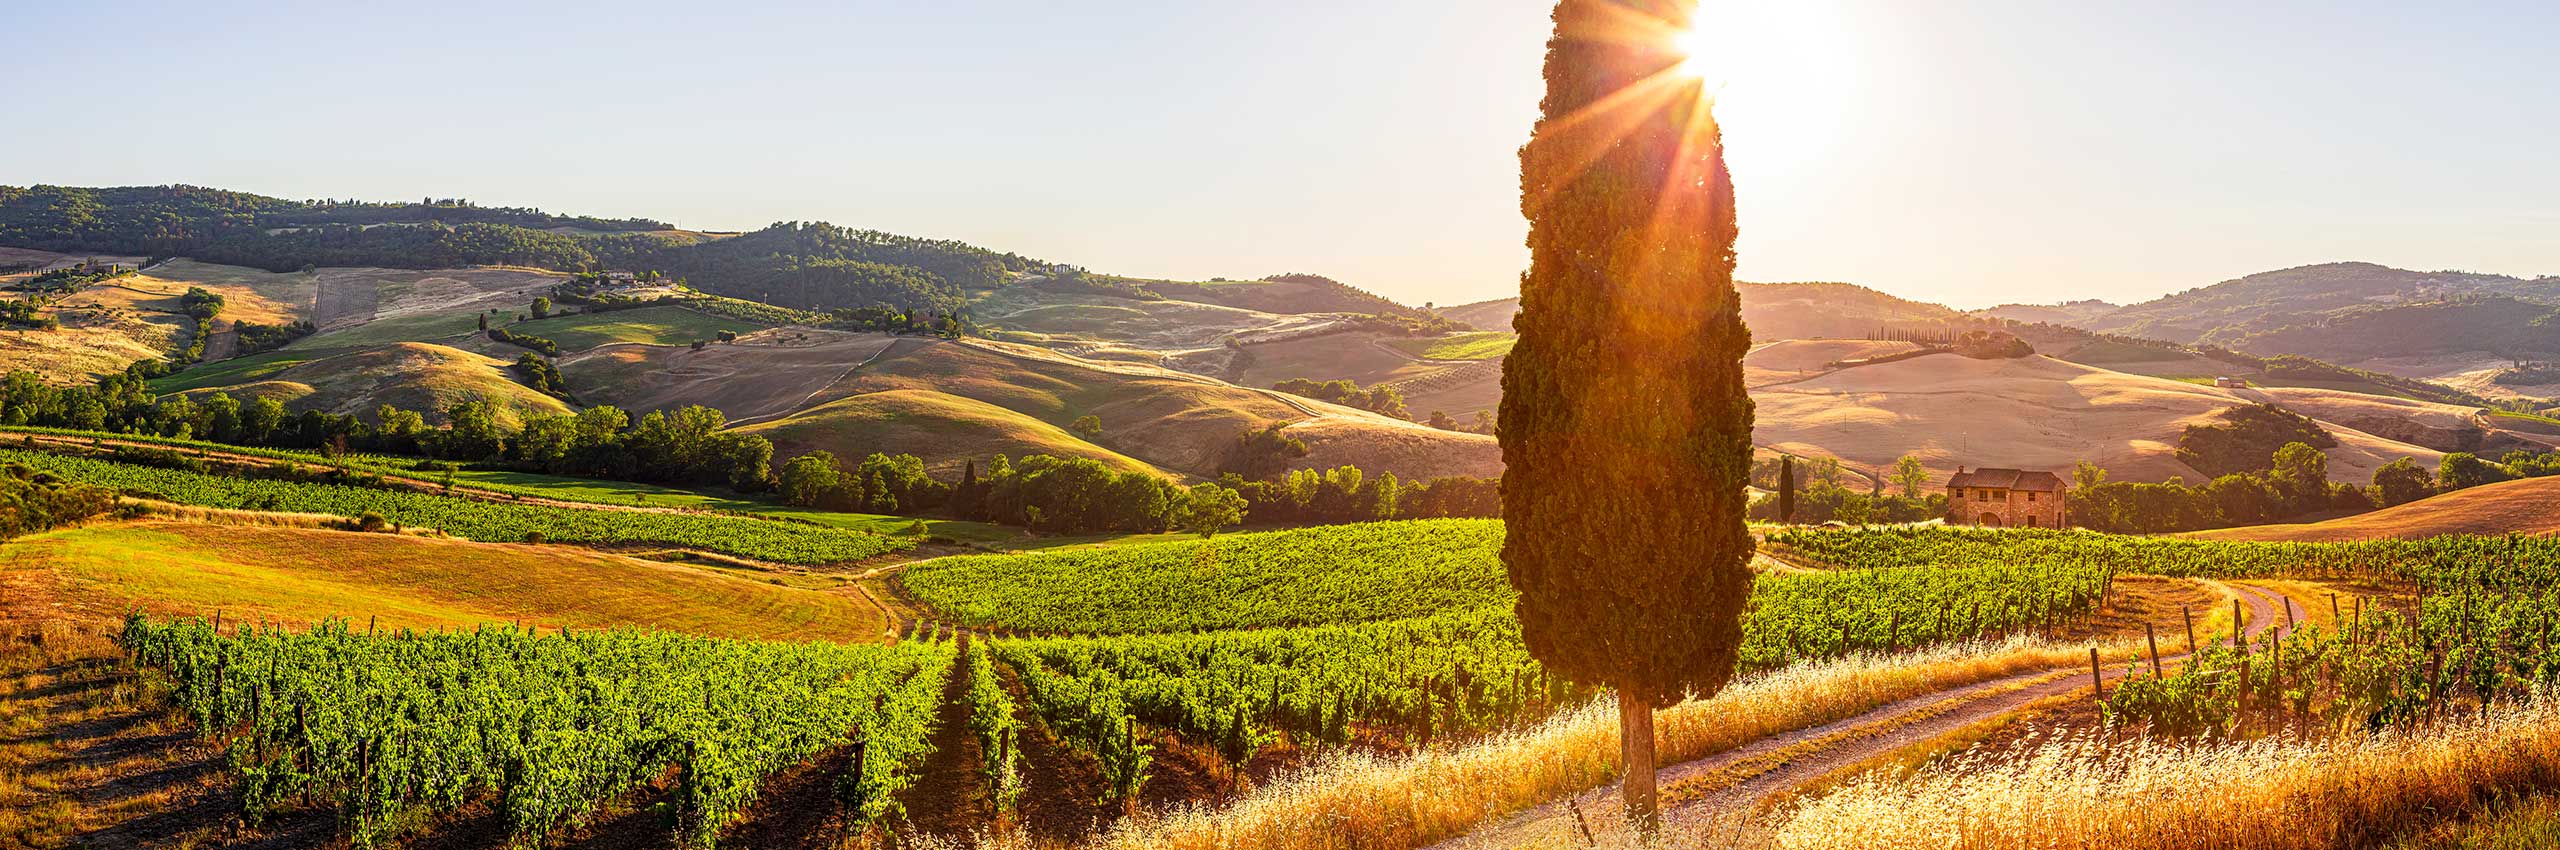 FCR-1232953 | Italy/Tuscany, Siena district, Orcia Valley, Pienza | © Paolo Evangelista/4Corners